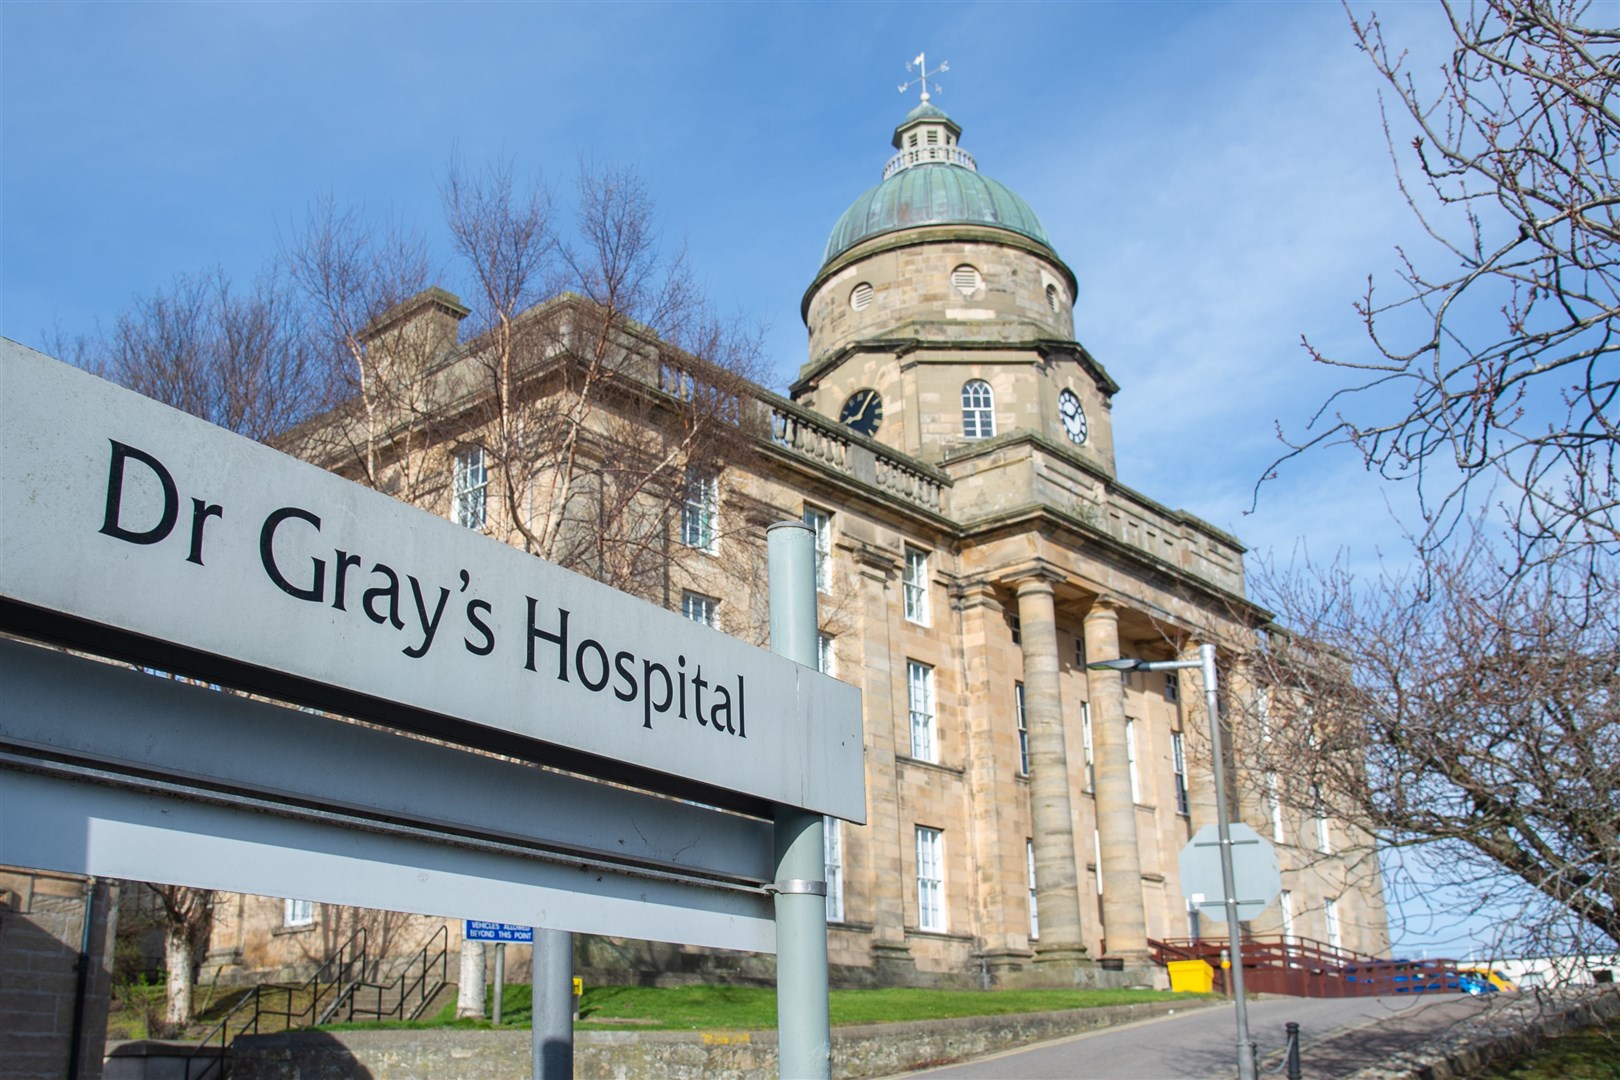 Elgin's Dr Gray's Hospital has been at capacity in recent days, says NHS Grampian. Picture: Daniel Forsyth.